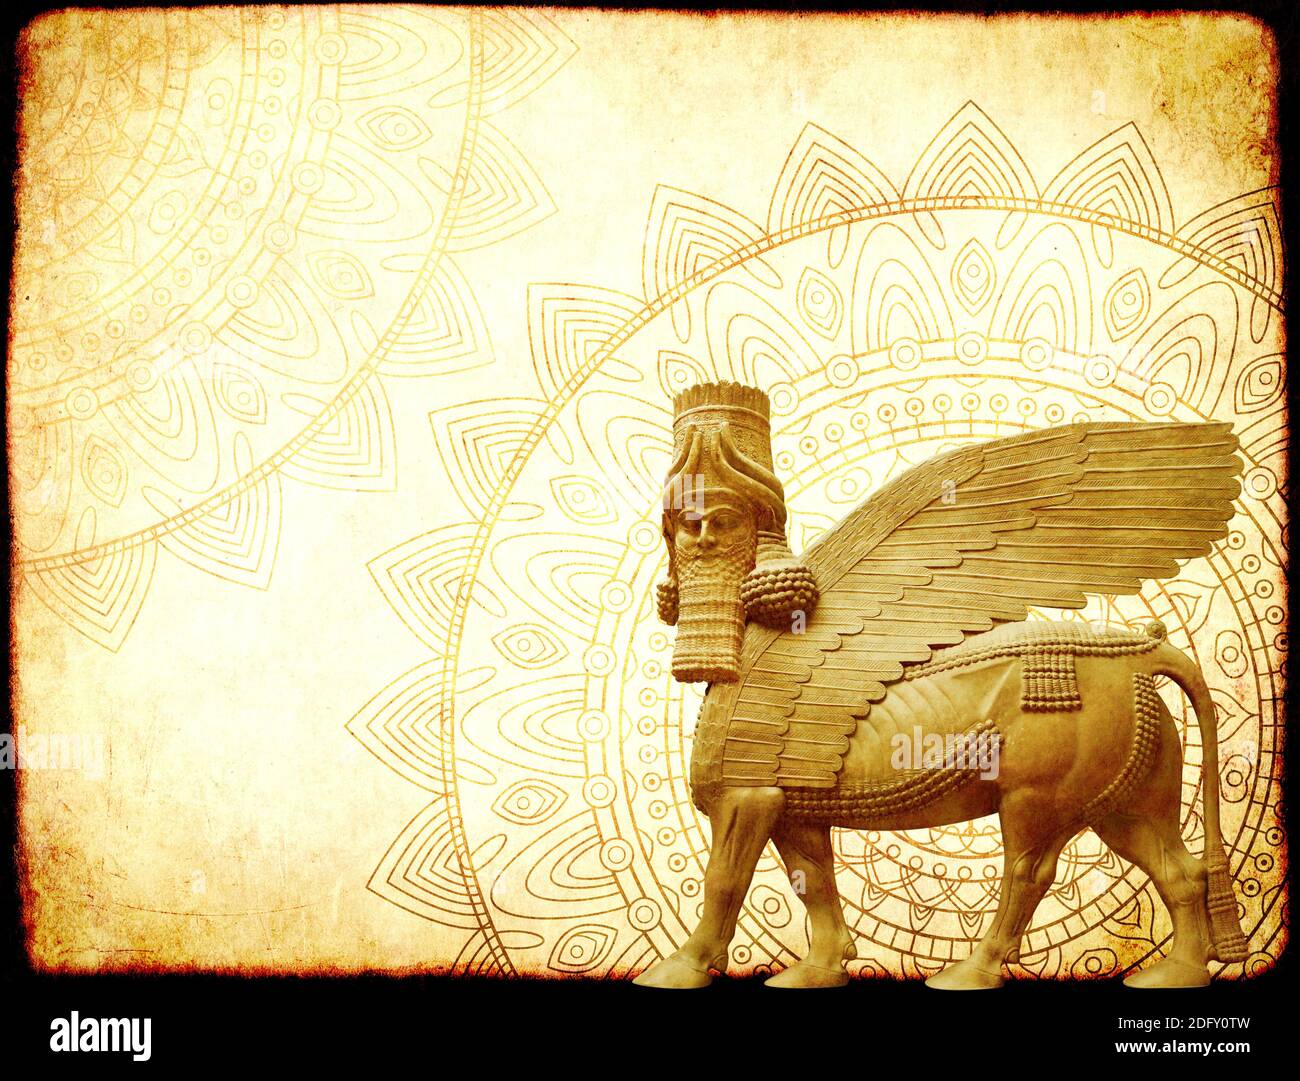 Grunge background with paper texture, zentangle mandala pattern and lamassu - human-headed winged bull statue, Assyrian protective deity. Copy space f Stock Photo